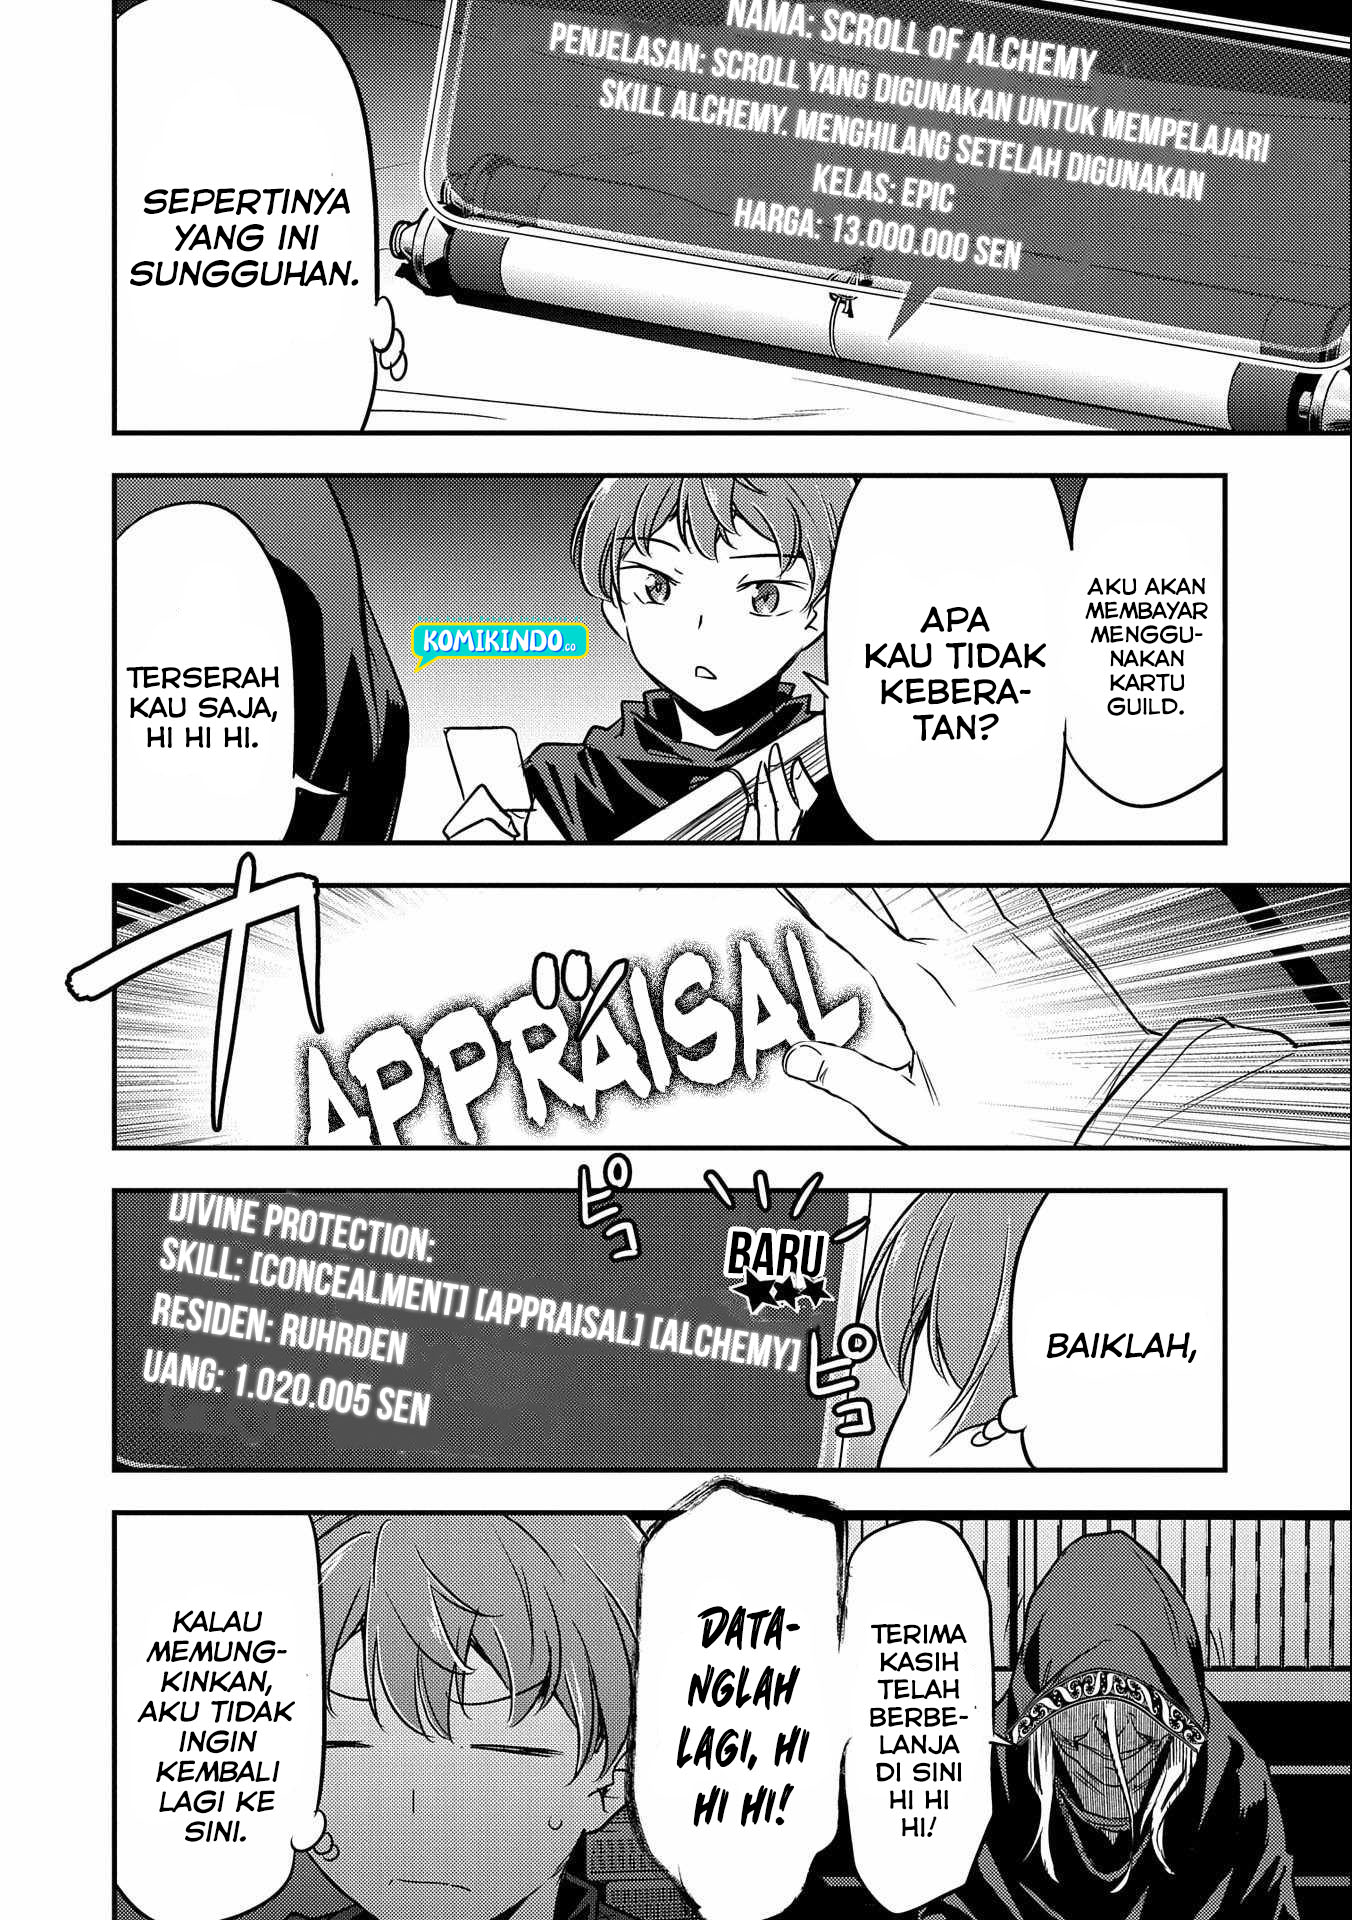 Villager A Wants to Save the Villainess no Matter What! Chapter 04